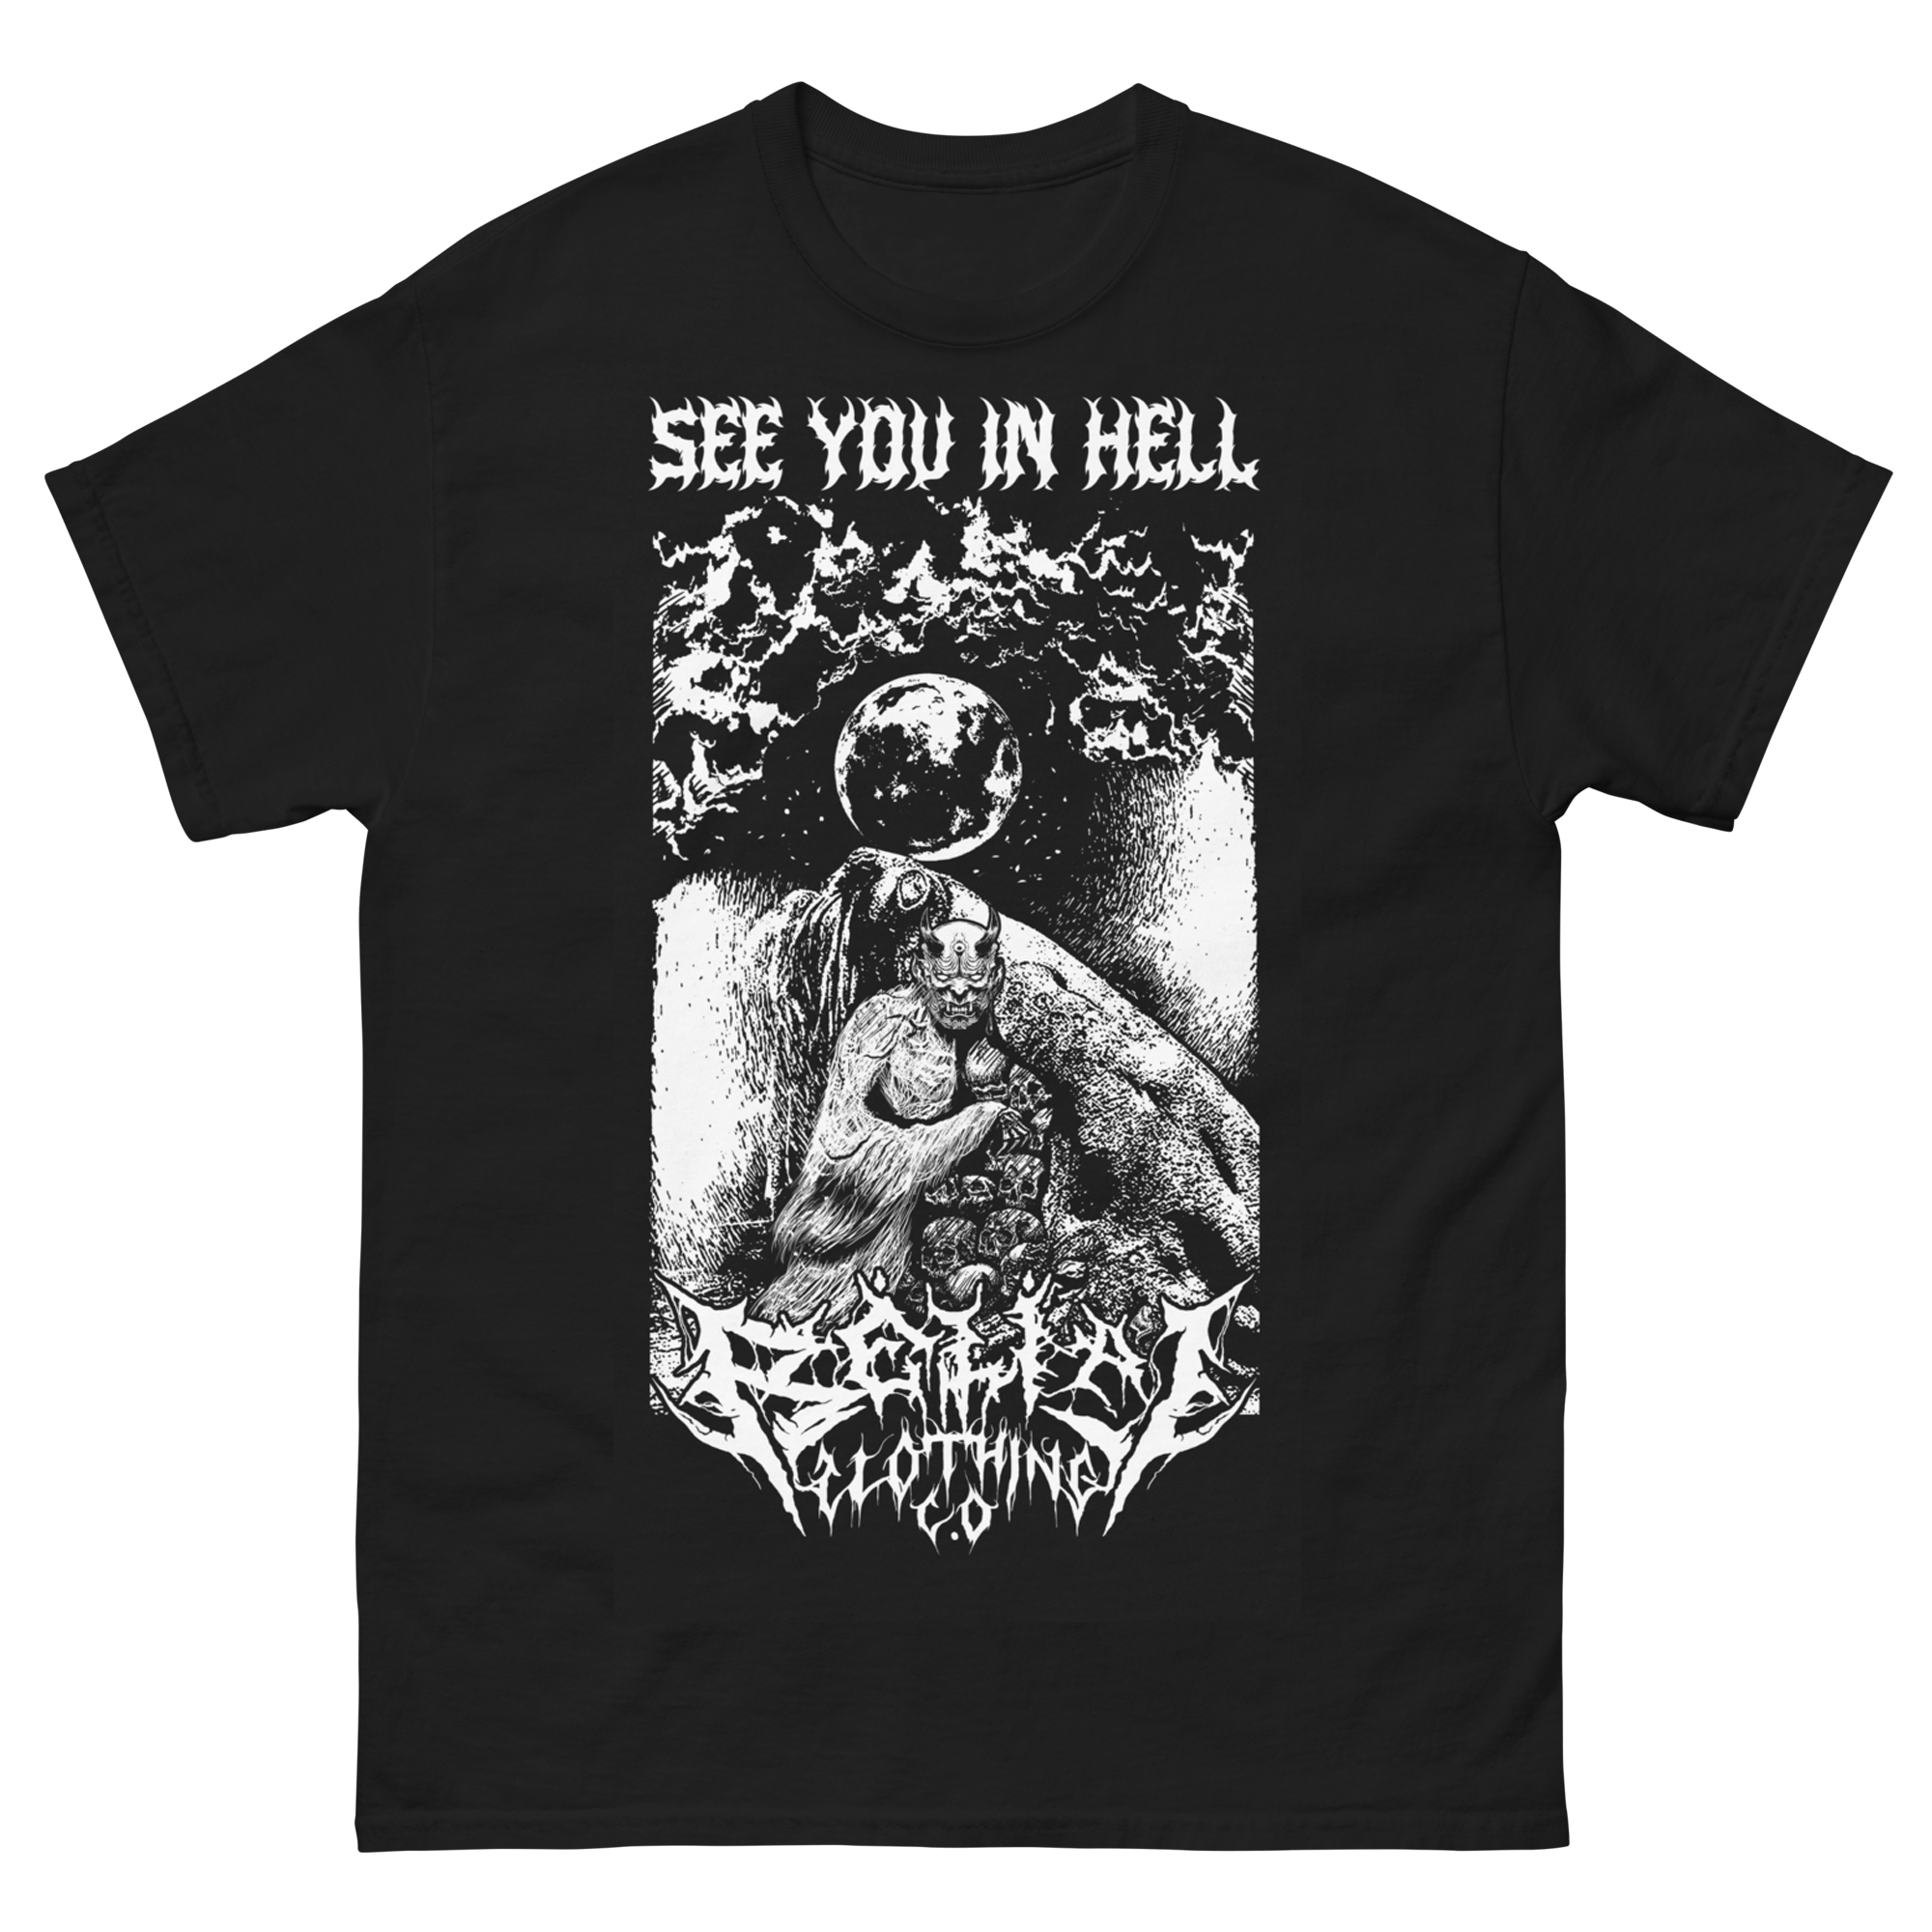 See you in Hell classic tee